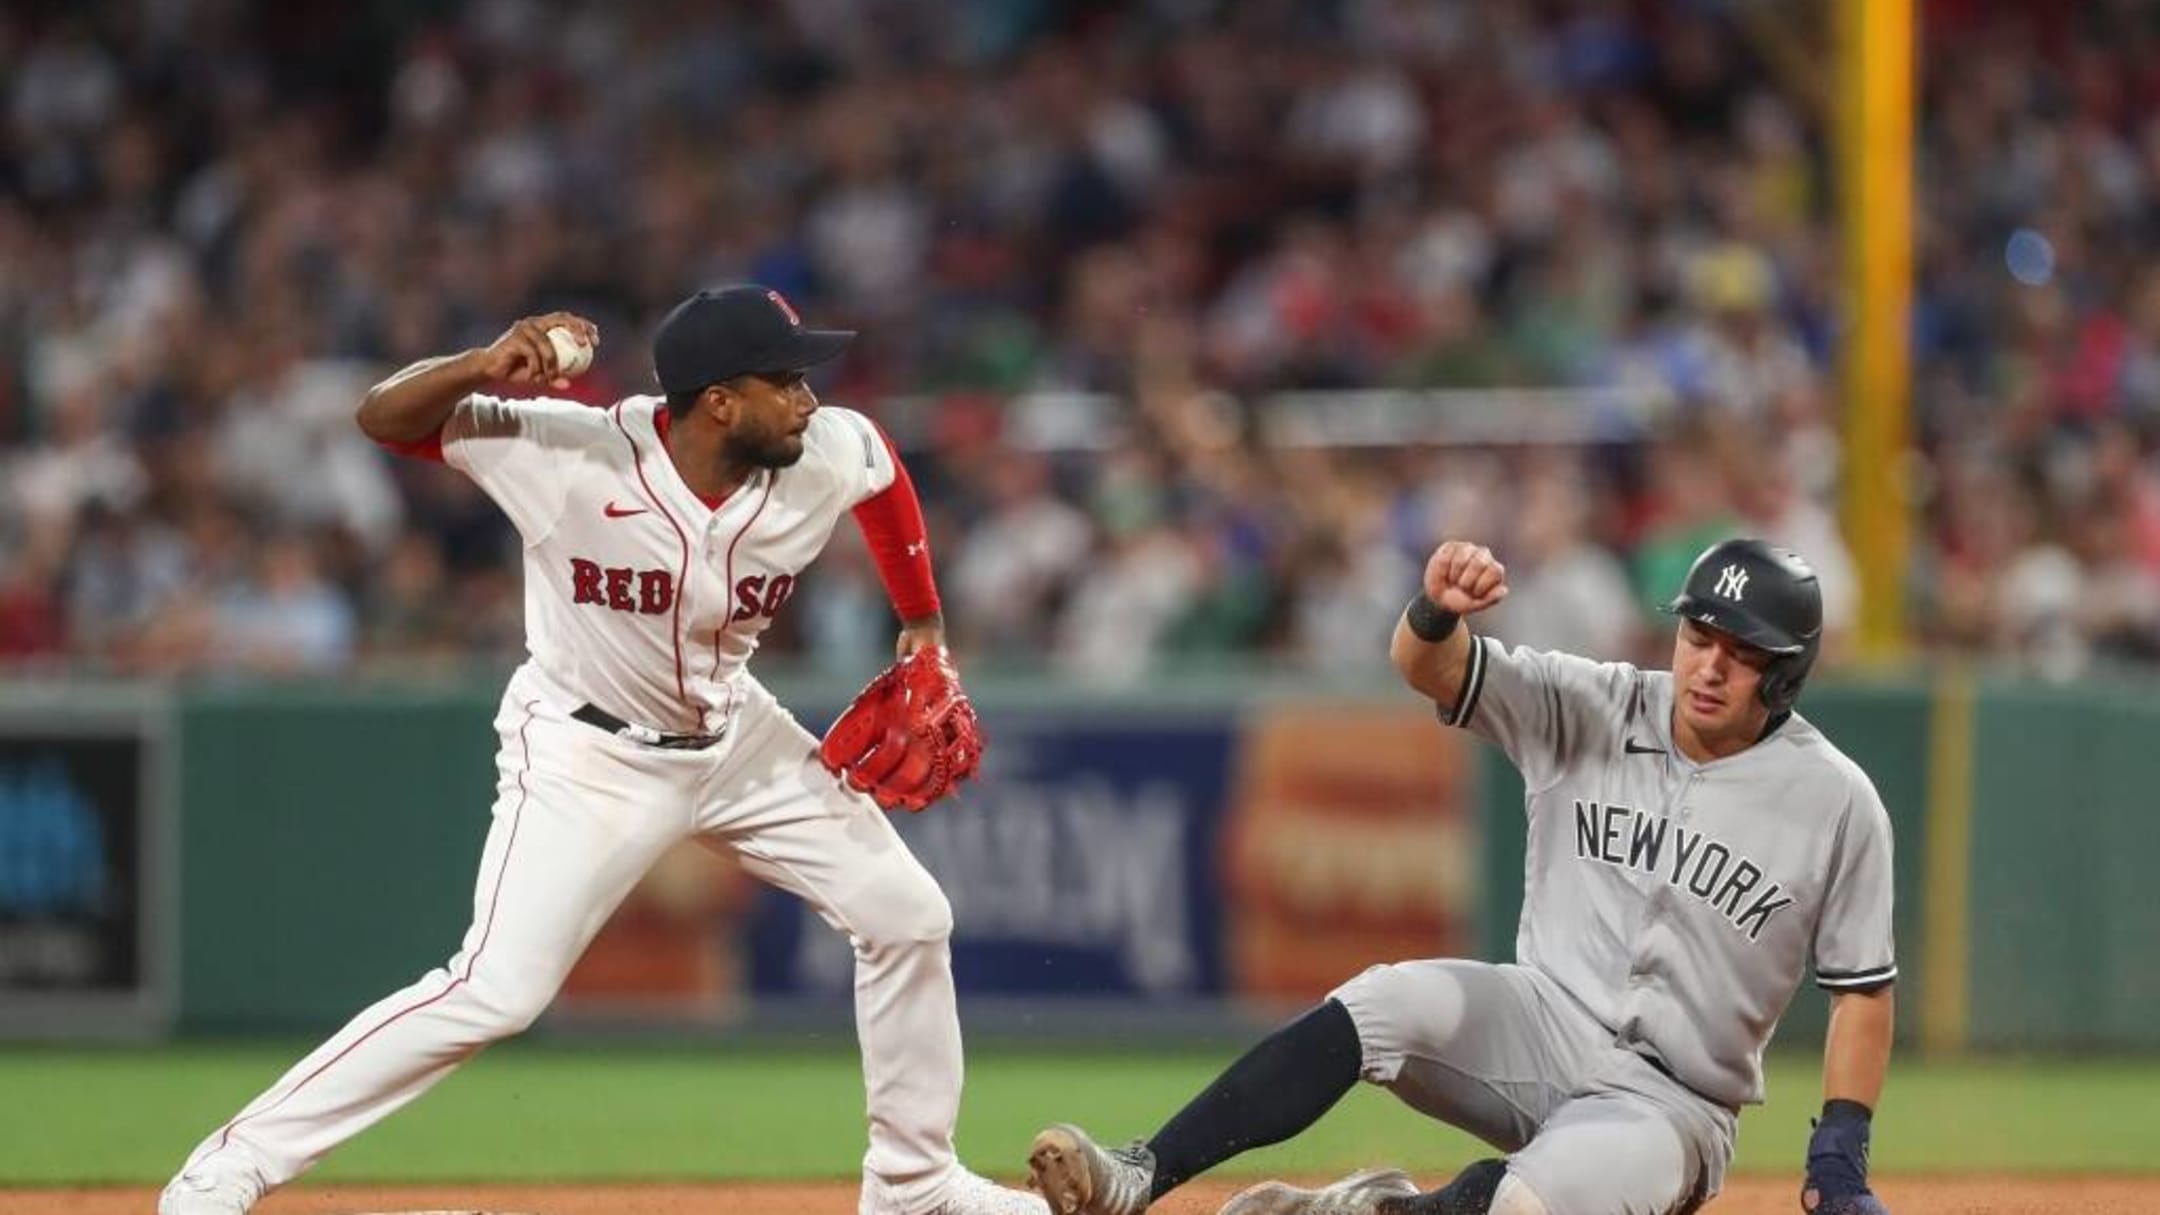 How to Watch Boston Red Sox vs. New York Yankees Live on